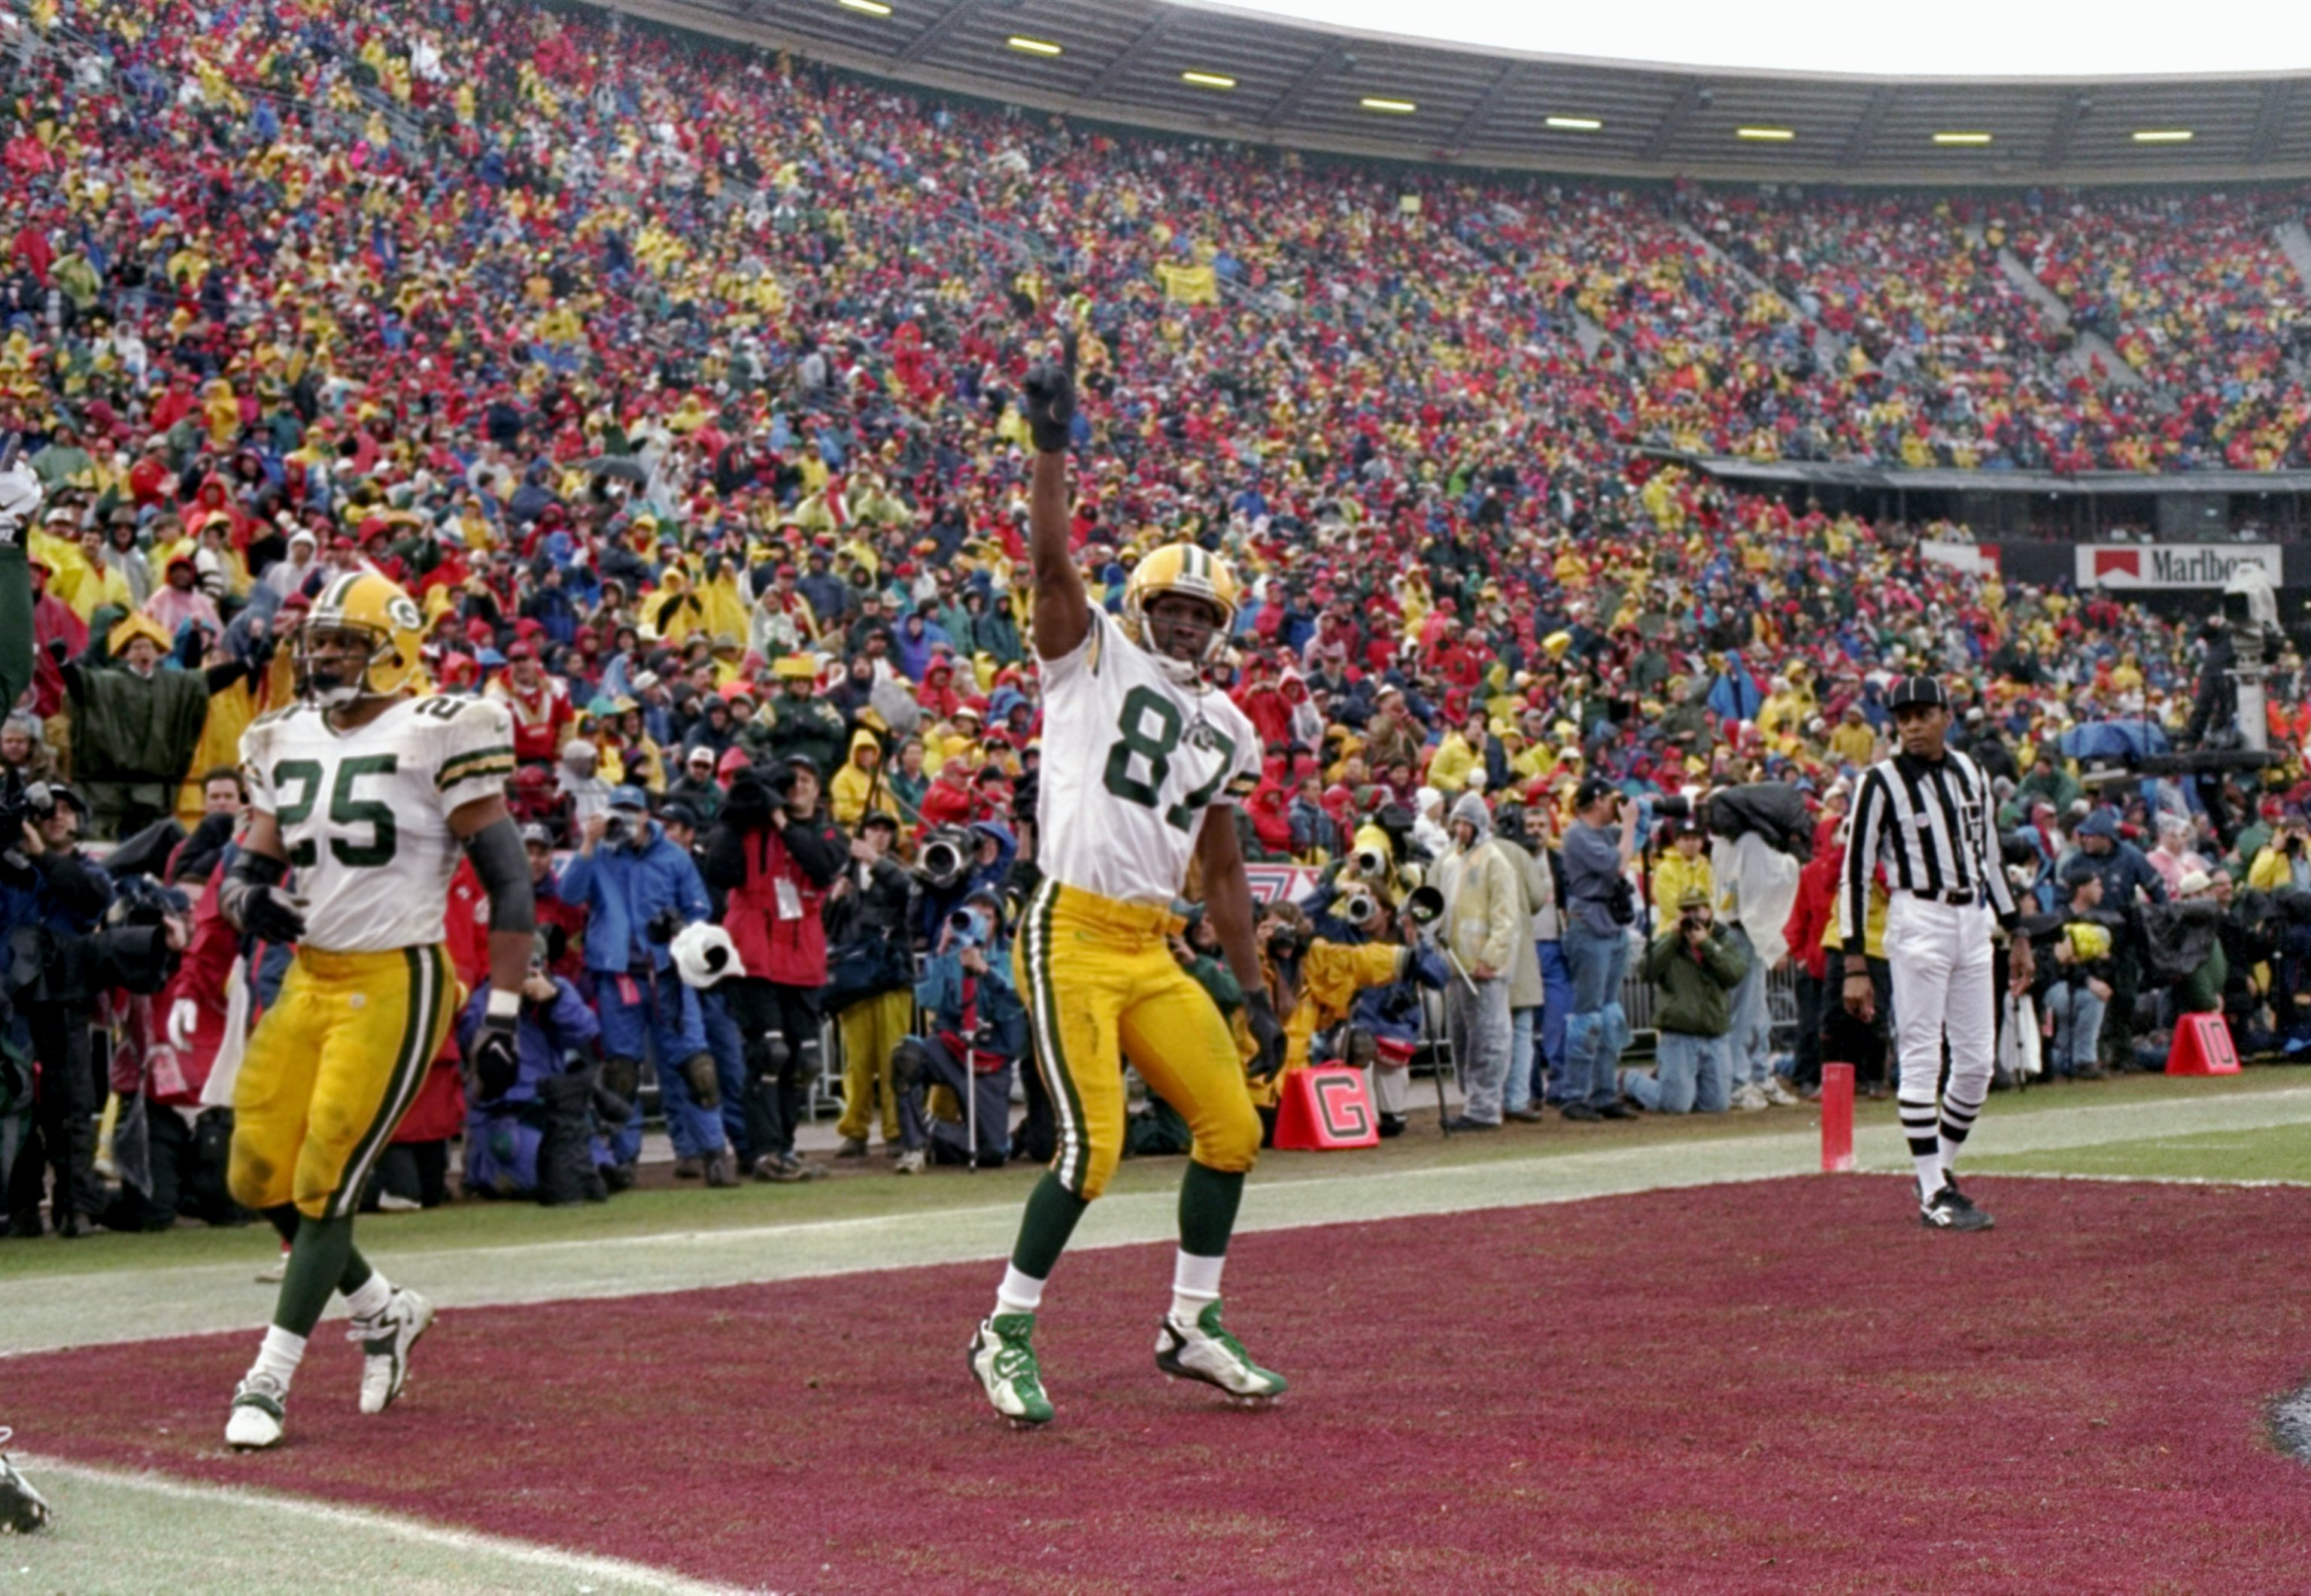 11 Jan 1998: Wide receiver Robert Brooks of the Green Bay Packers celebrates during a playoff game against the San Francisco 49ers at 3Com Park in San Francisco, California. The Packers won the game, 23-10.